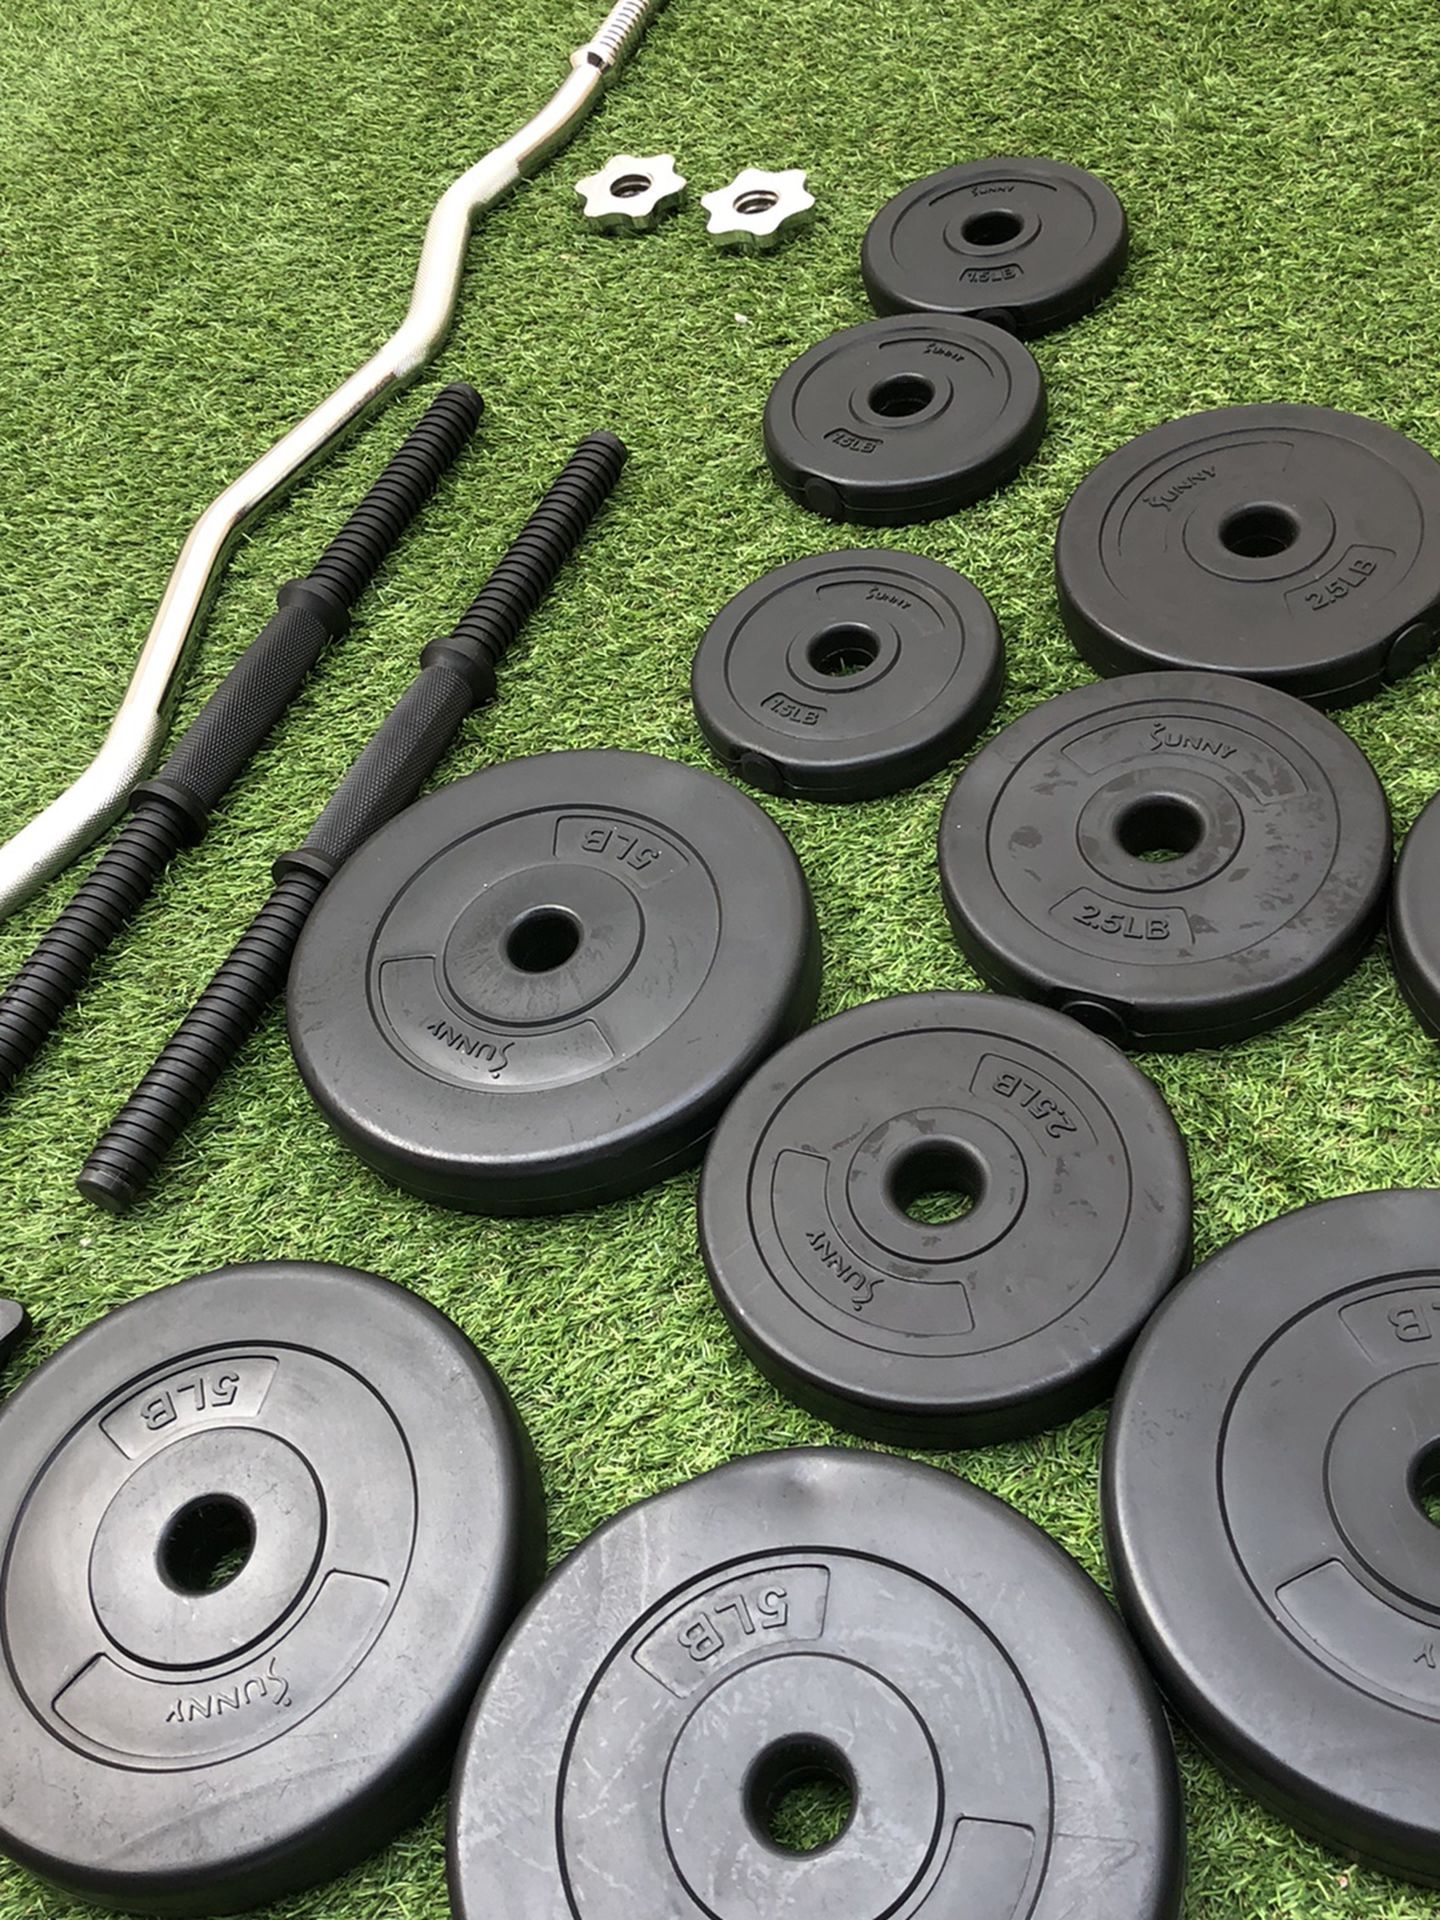 Gym Equipment Dumbell Weights And Curl Bar